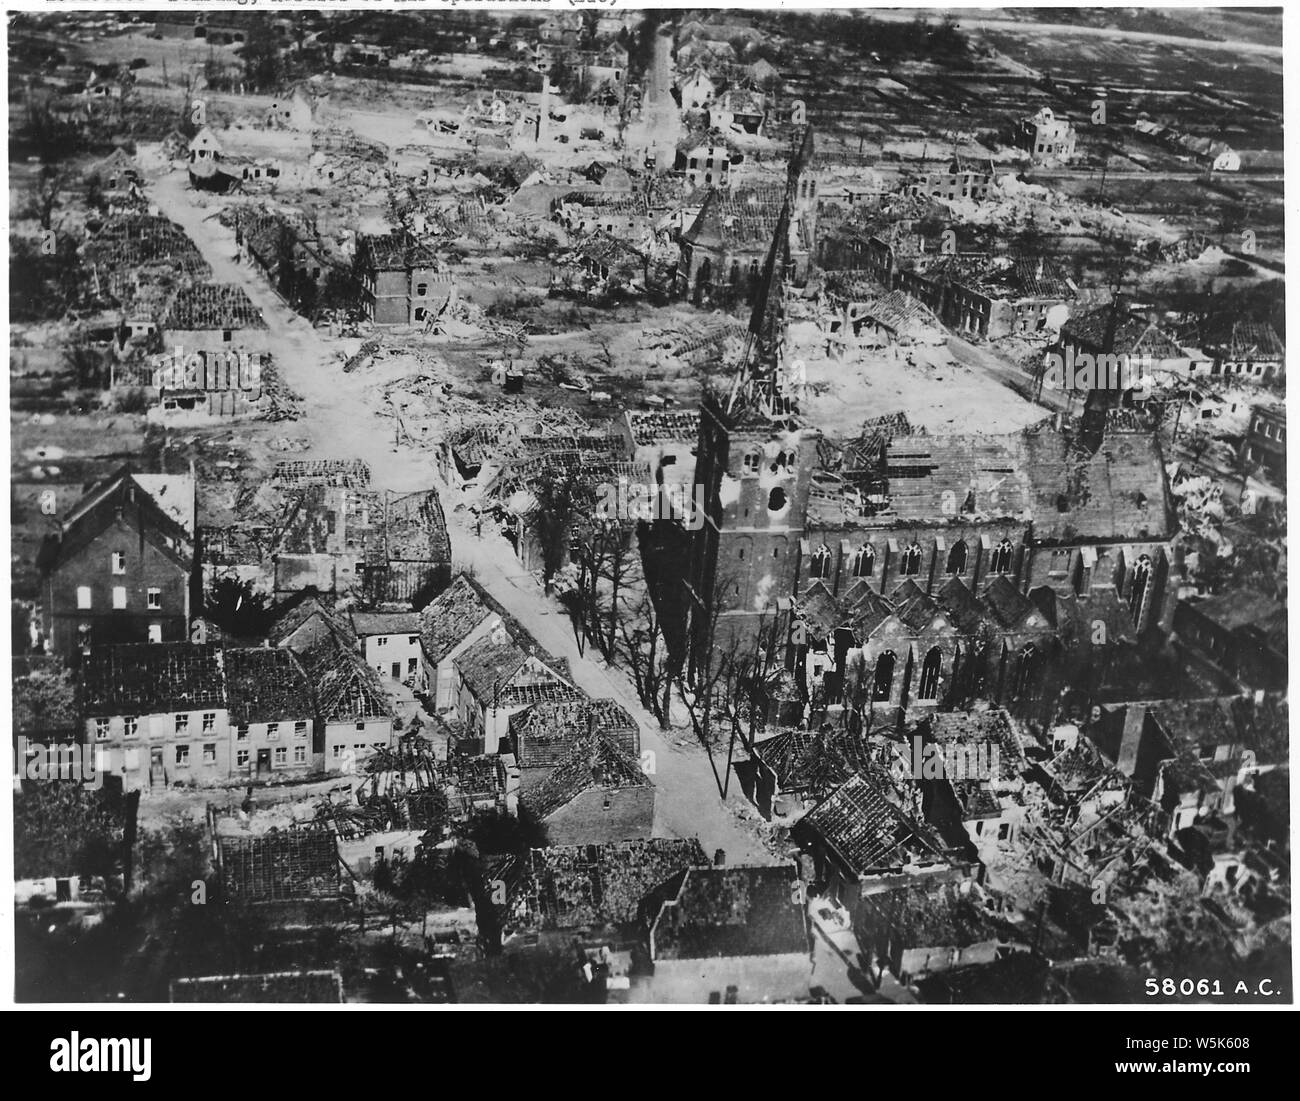 Bombing campaign. Europe & North Africa; Scope and content:  This German town, in the path of General Montgomery's armies crossing the Rhine, has been torn by the passing battle. Hardly a building stands undamaged. The picture was made by a B-24 Liberator of the U.S. 8th Air Force Second Air Division that flew in at 200 feet to drop supplies to the 1st Allied Airborne Army that landed east of the Rhine from 1500 transports and gliders. March 24, 1945. Stock Photo